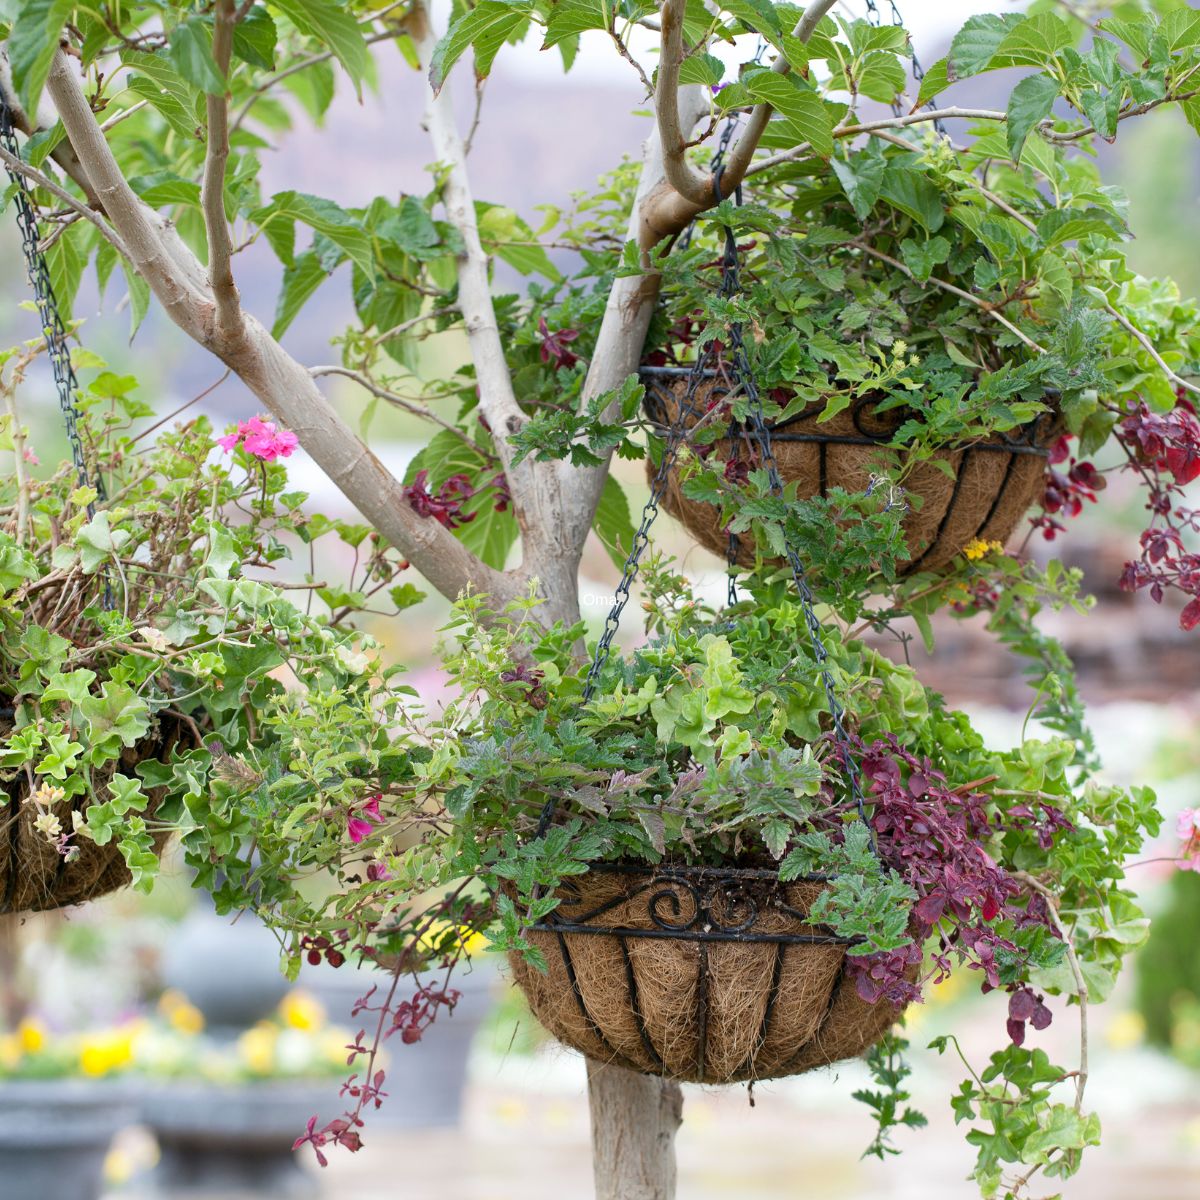 3 hanging baskets of various flowers and plants, hanging from a tree.